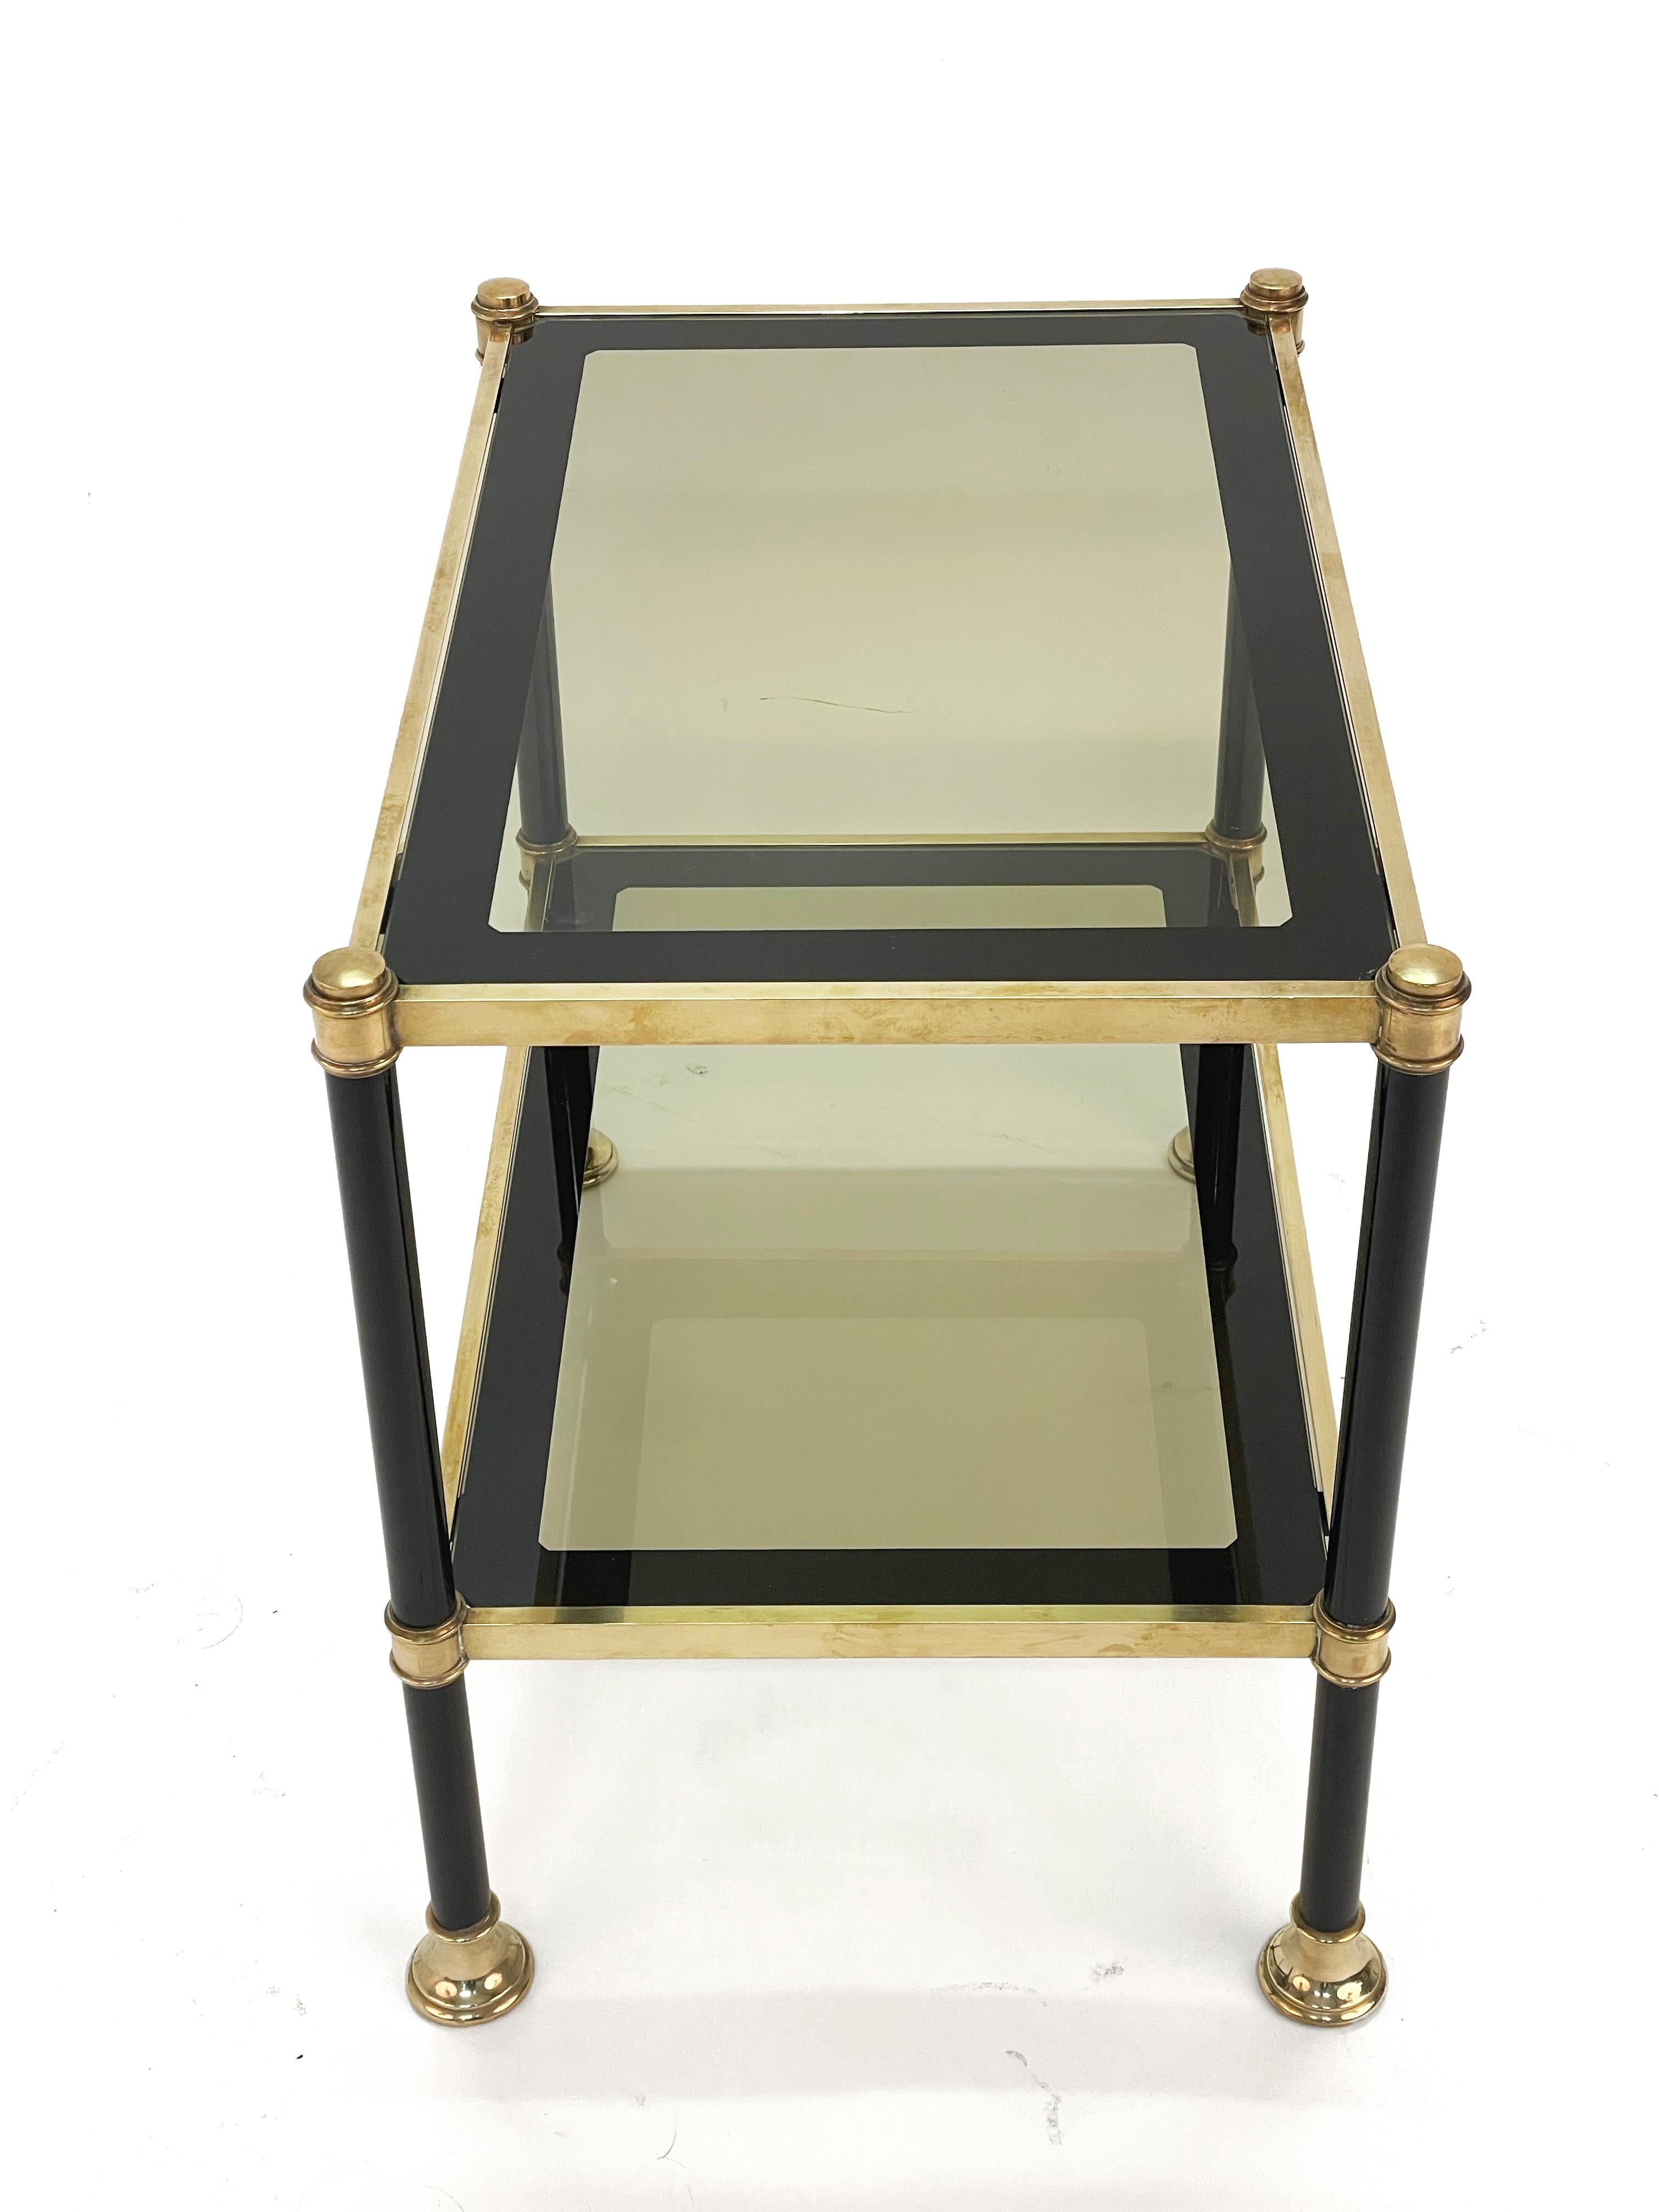 Lacquered Midcentury Brass and Black Metal Rectangular Coffee Table with Smoked Glass 1970 For Sale